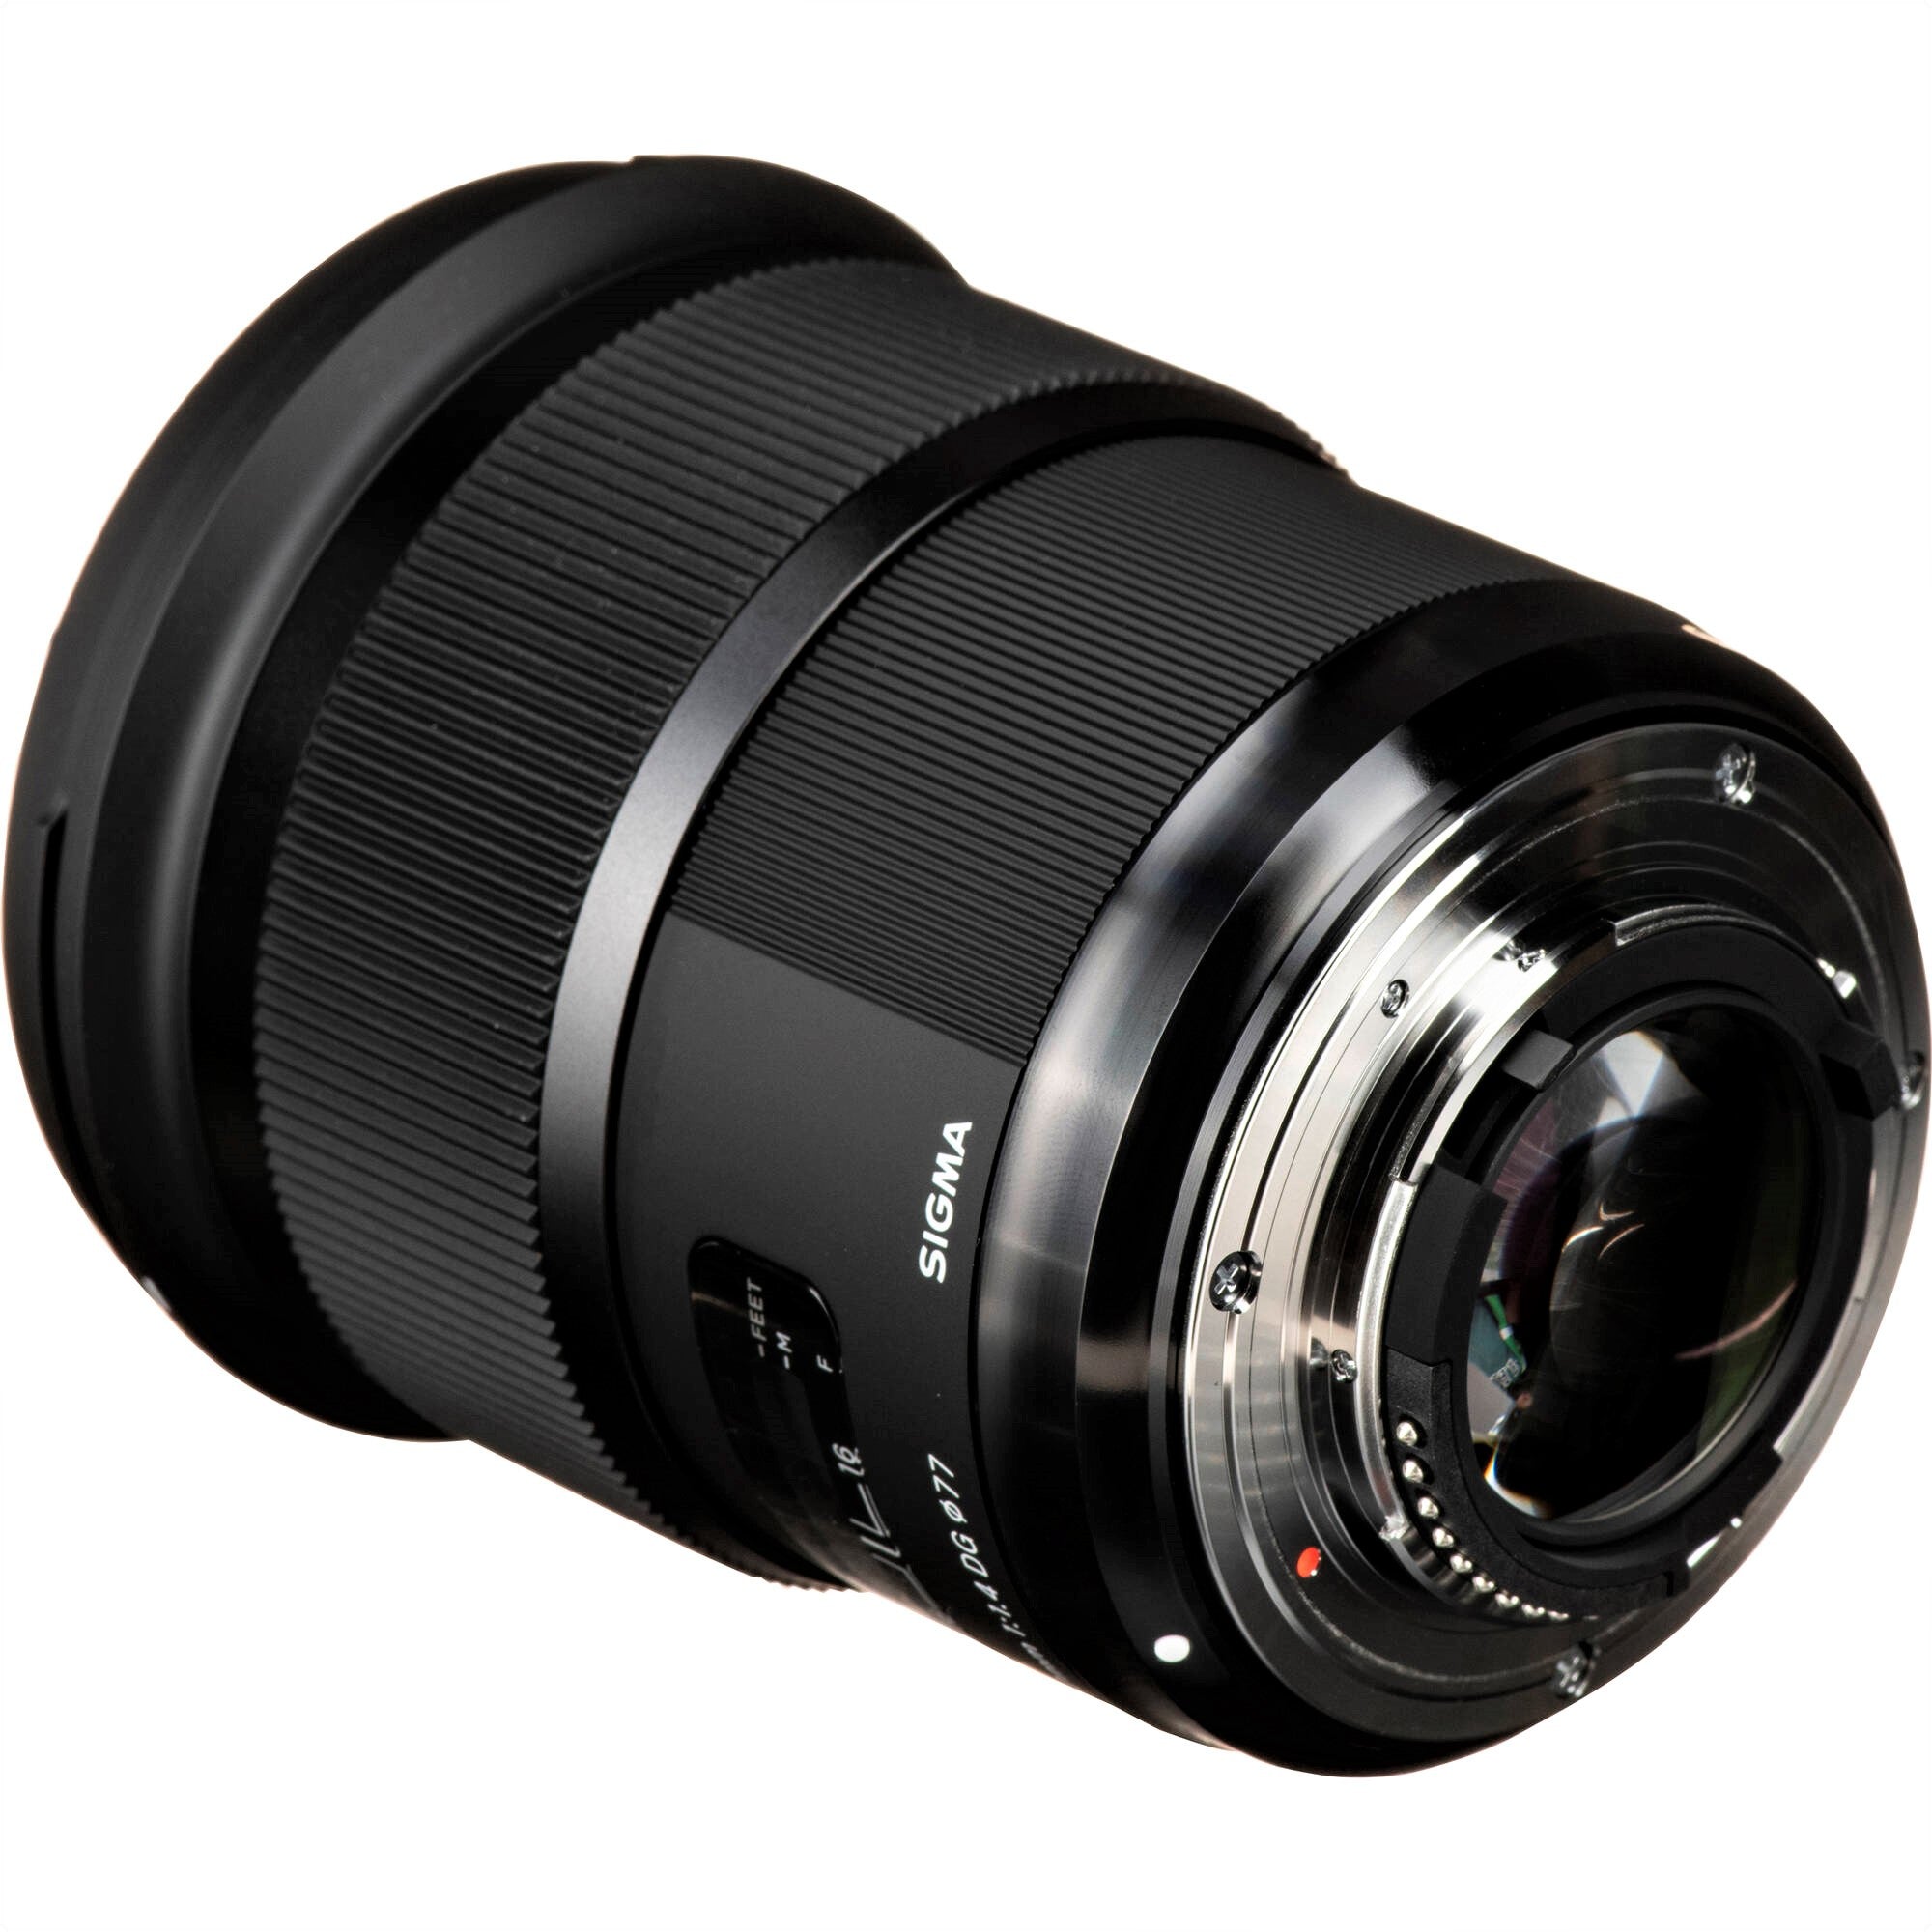 Sigma 50mm F1.4 DG HSM Art Lens for Nikon F in a Back-Side View